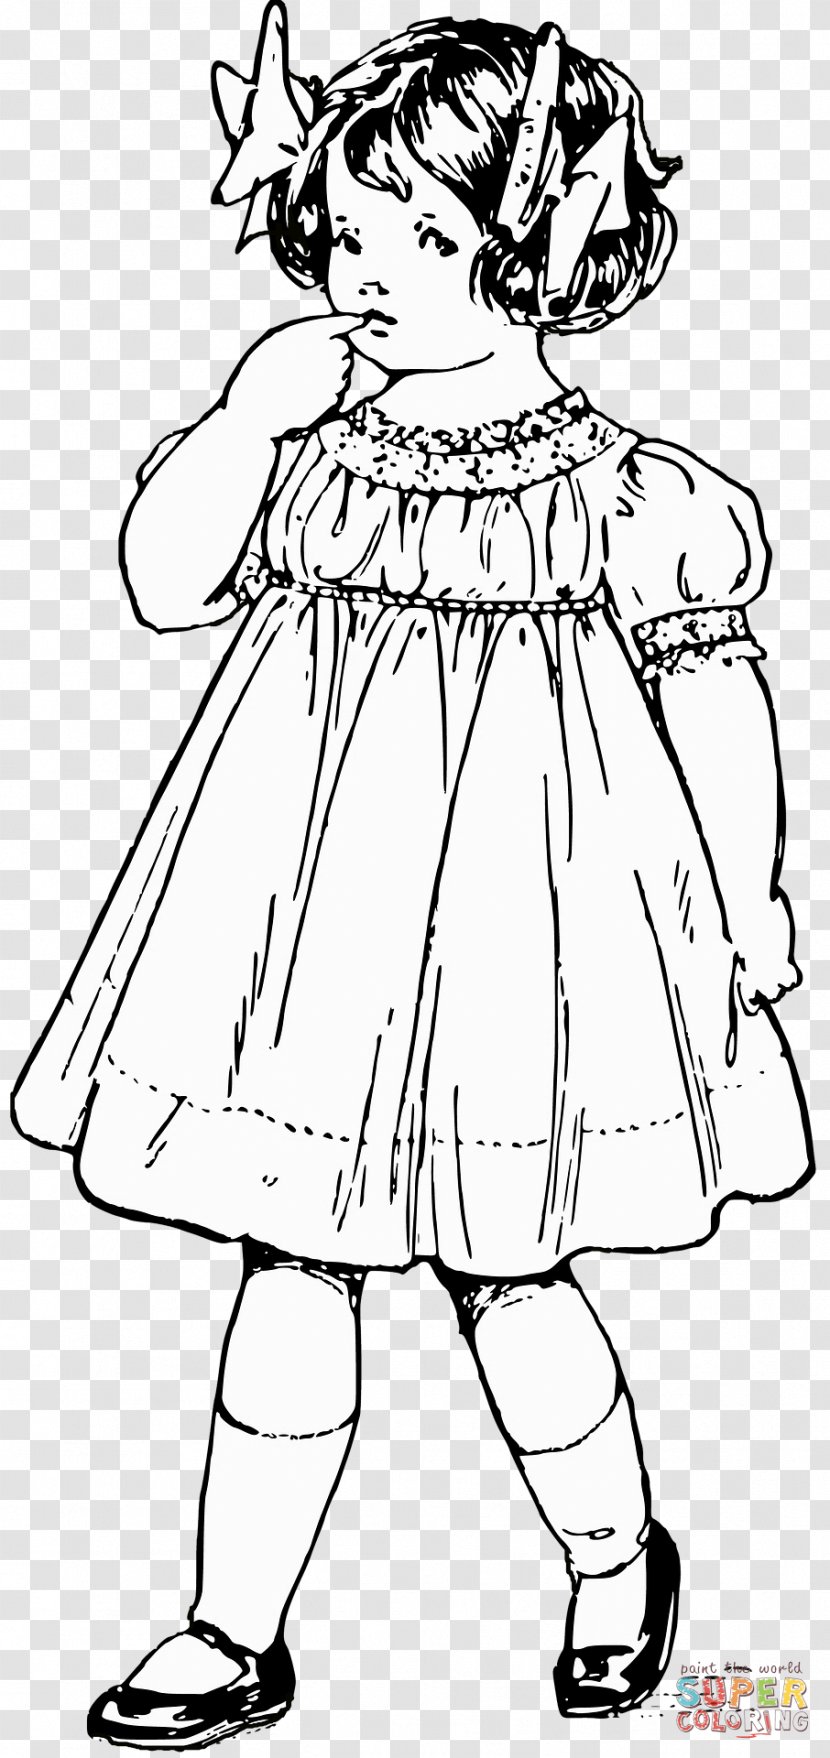 Black And White Line Art Woman Dress Drawing - Artwork Transparent PNG